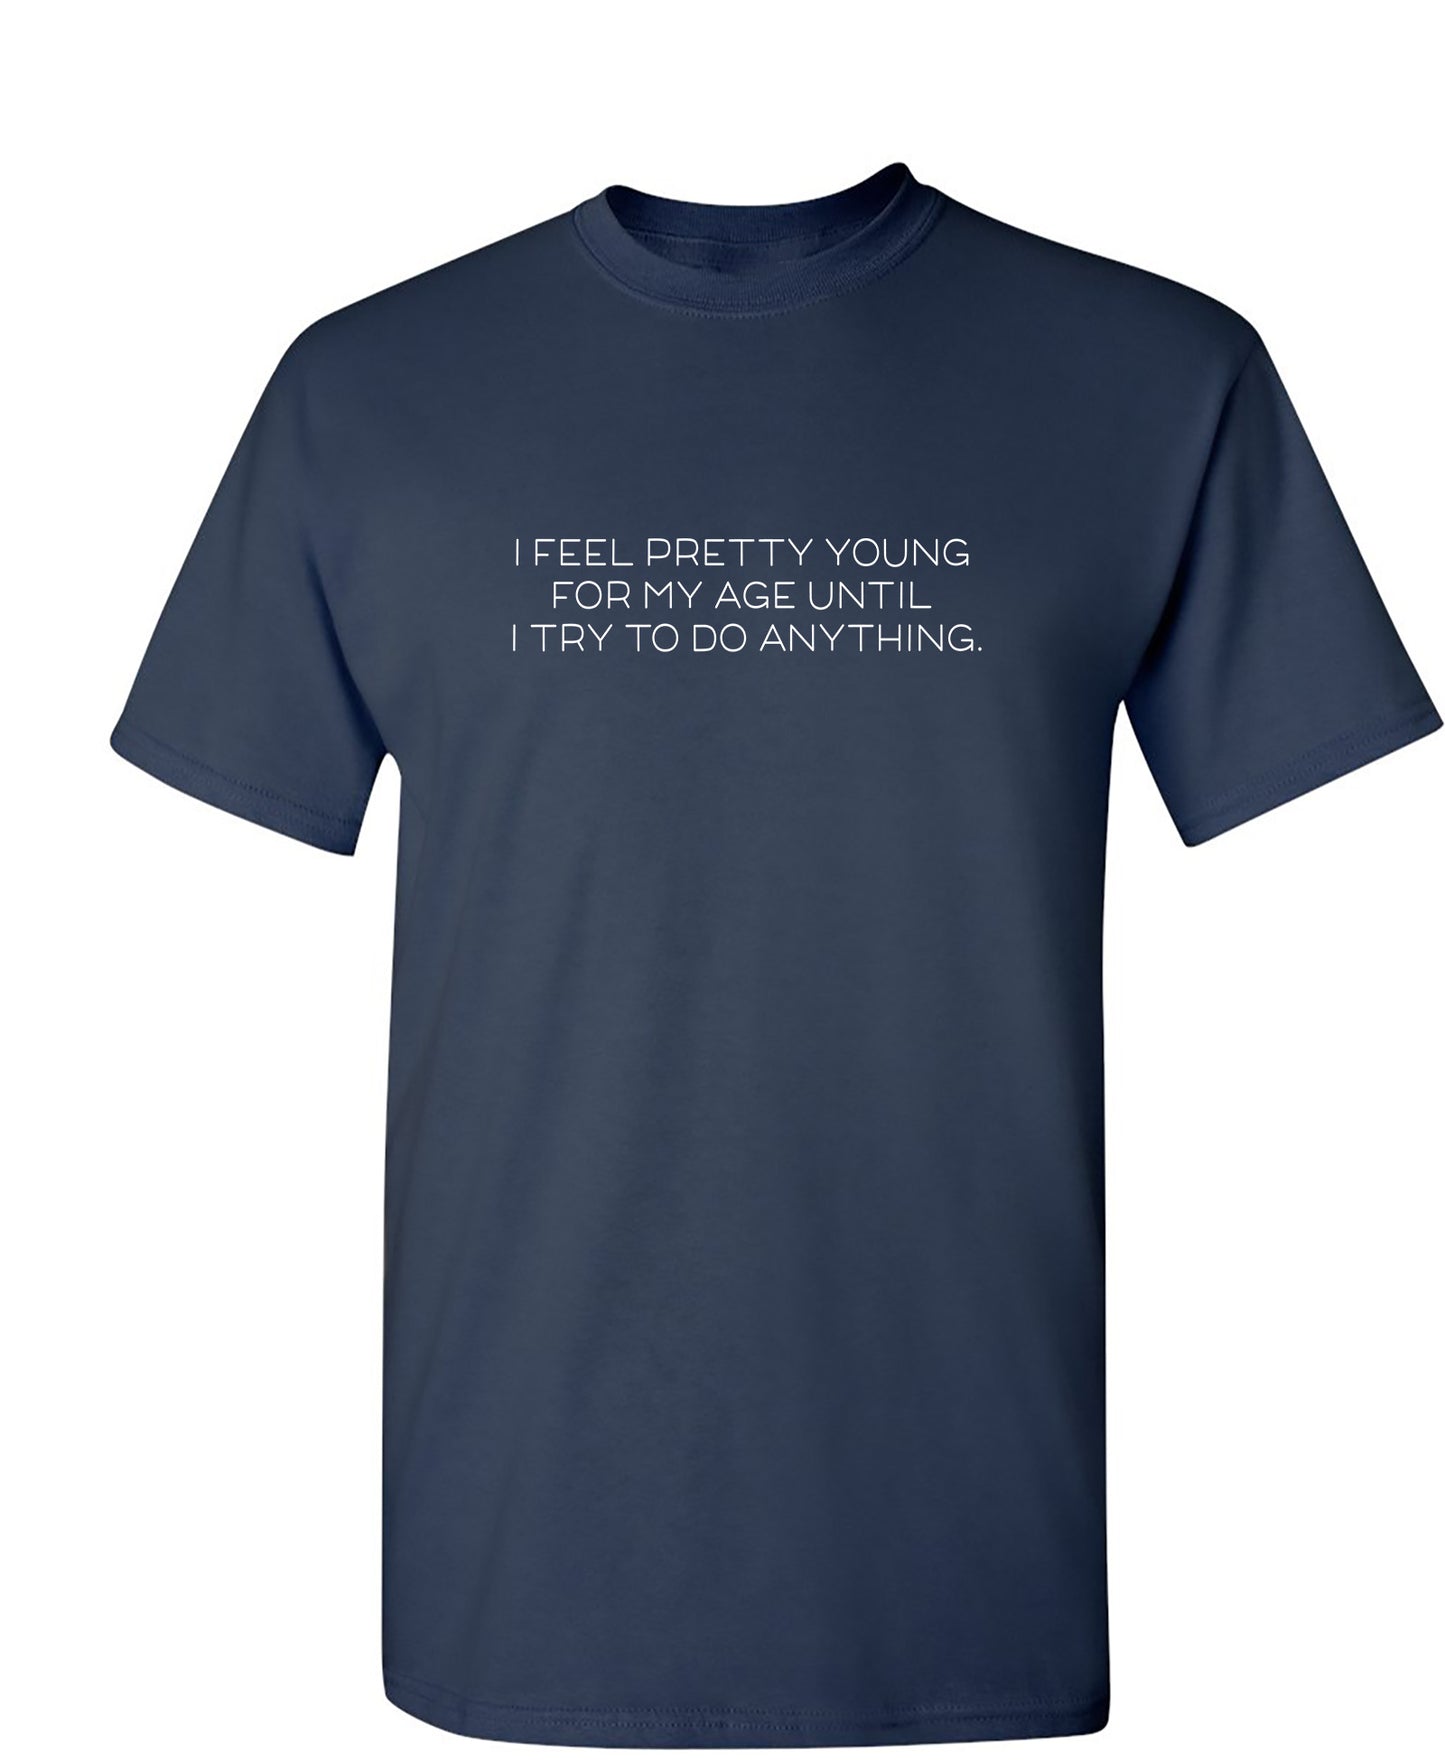 I Feel Pretty Young For My Age Until I Try To Do Anything - Funny T Shirts & Graphic Tees